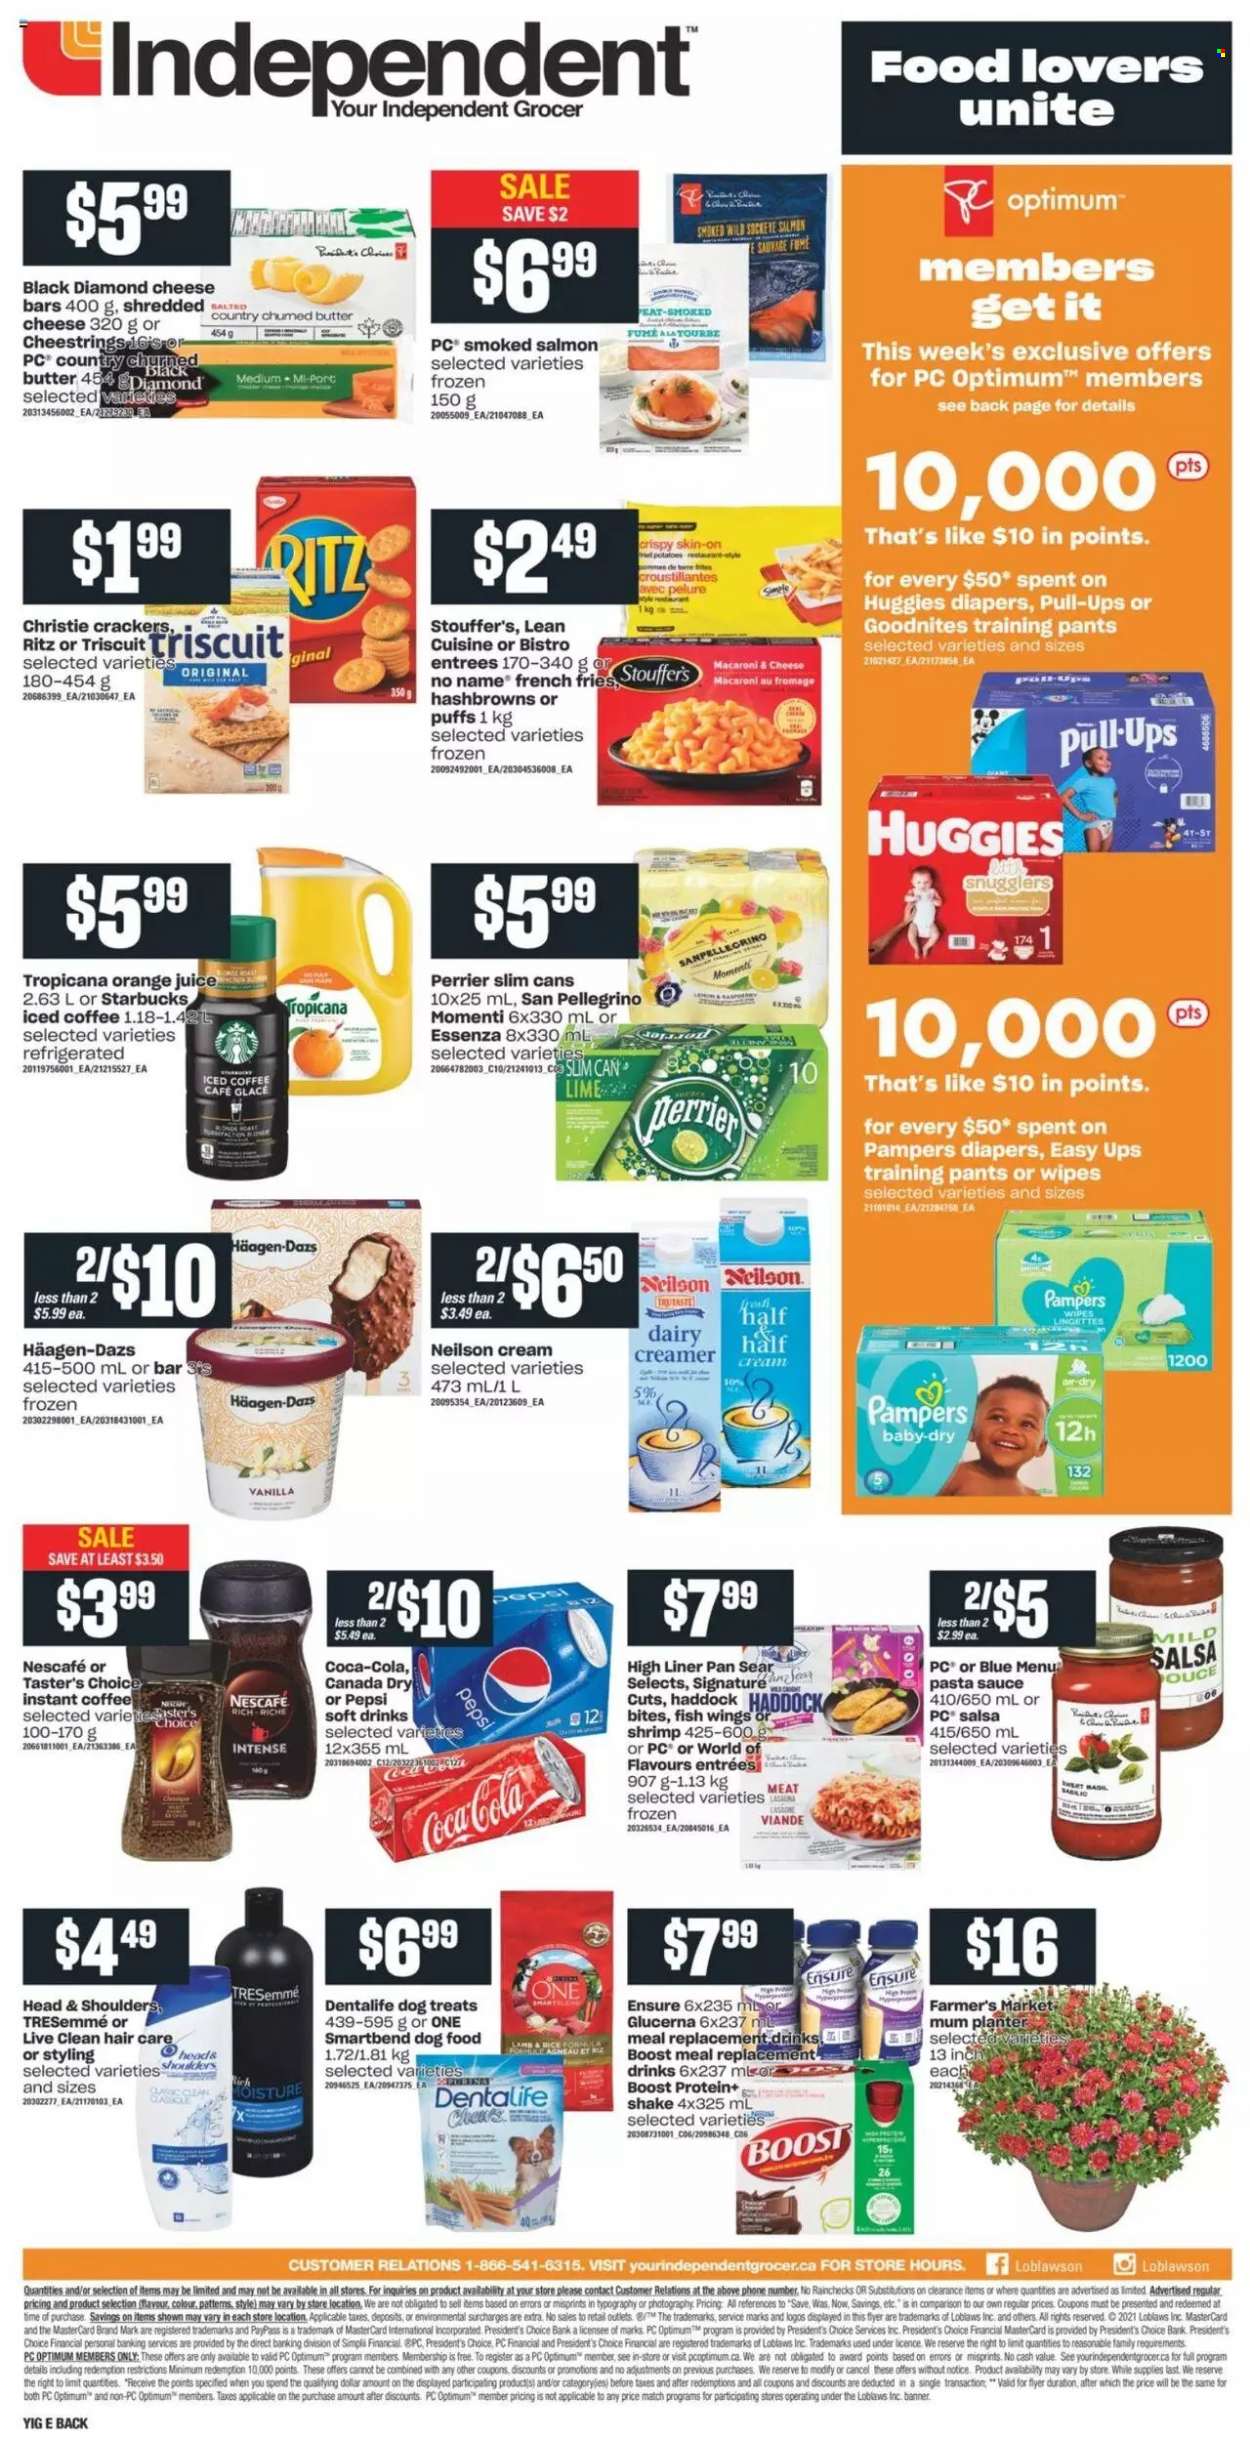 thumbnail - Independent Flyer - September 23, 2021 - September 29, 2021 - Sales products - puffs, smoked salmon, haddock, fish, shrimps, No Name, macaroni & cheese, pasta sauce, sauce, Lean Cuisine, string cheese, Président, shake, butter, creamer, Häagen-Dazs, Stouffer's, hash browns, potato fries, french fries, crackers, RITZ, salsa, Canada Dry, Coca-Cola, Pepsi, orange juice, juice, soft drink, Perrier, San Pellegrino, iced coffee, Boost, instant coffee, Starbucks, wipes, pants, nappies, baby pants, TRESemmé, Mum, pan, animal food, dog food, Purina, Optimum, Dentalife, Glucerna, Head & Shoulders, Huggies, Pampers, Nescafé. Page 2.